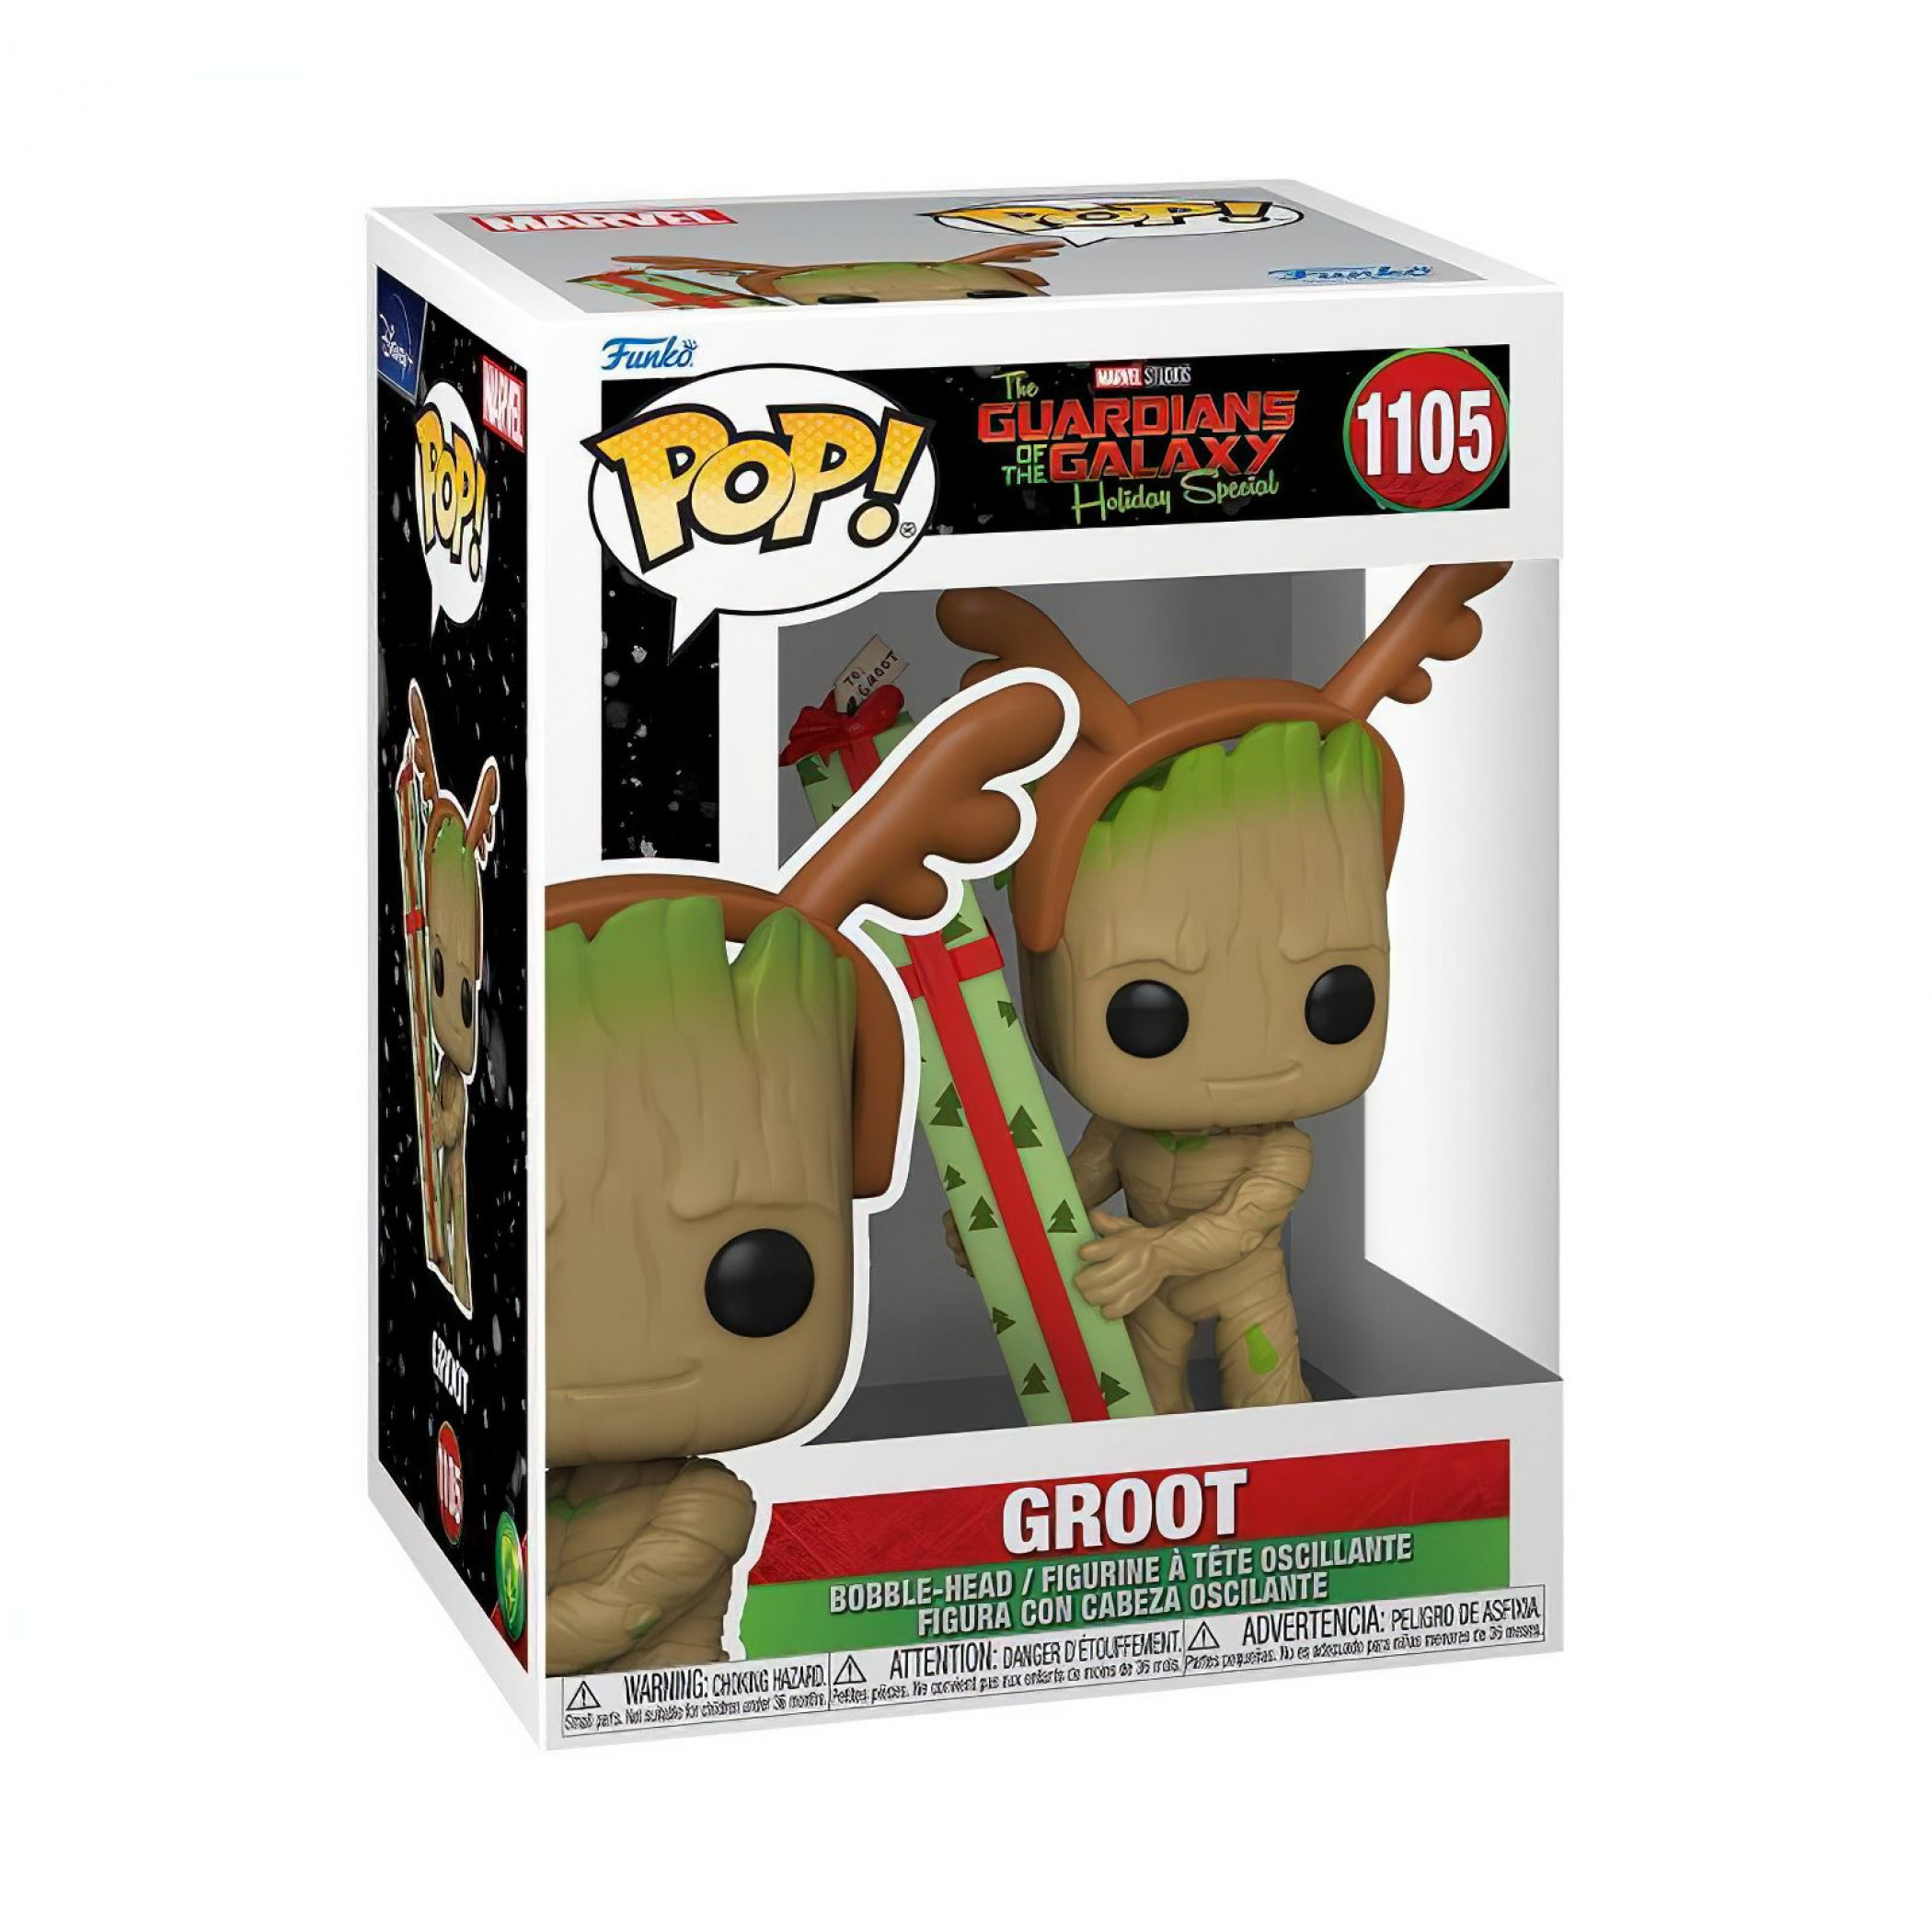 Guardians of the Galaxy Holiday Groot Funko Pop! Vinyl Figure